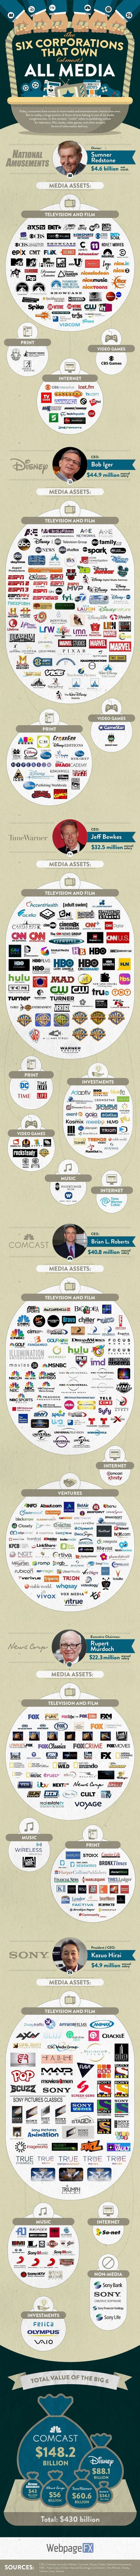 Companies That Control All Media